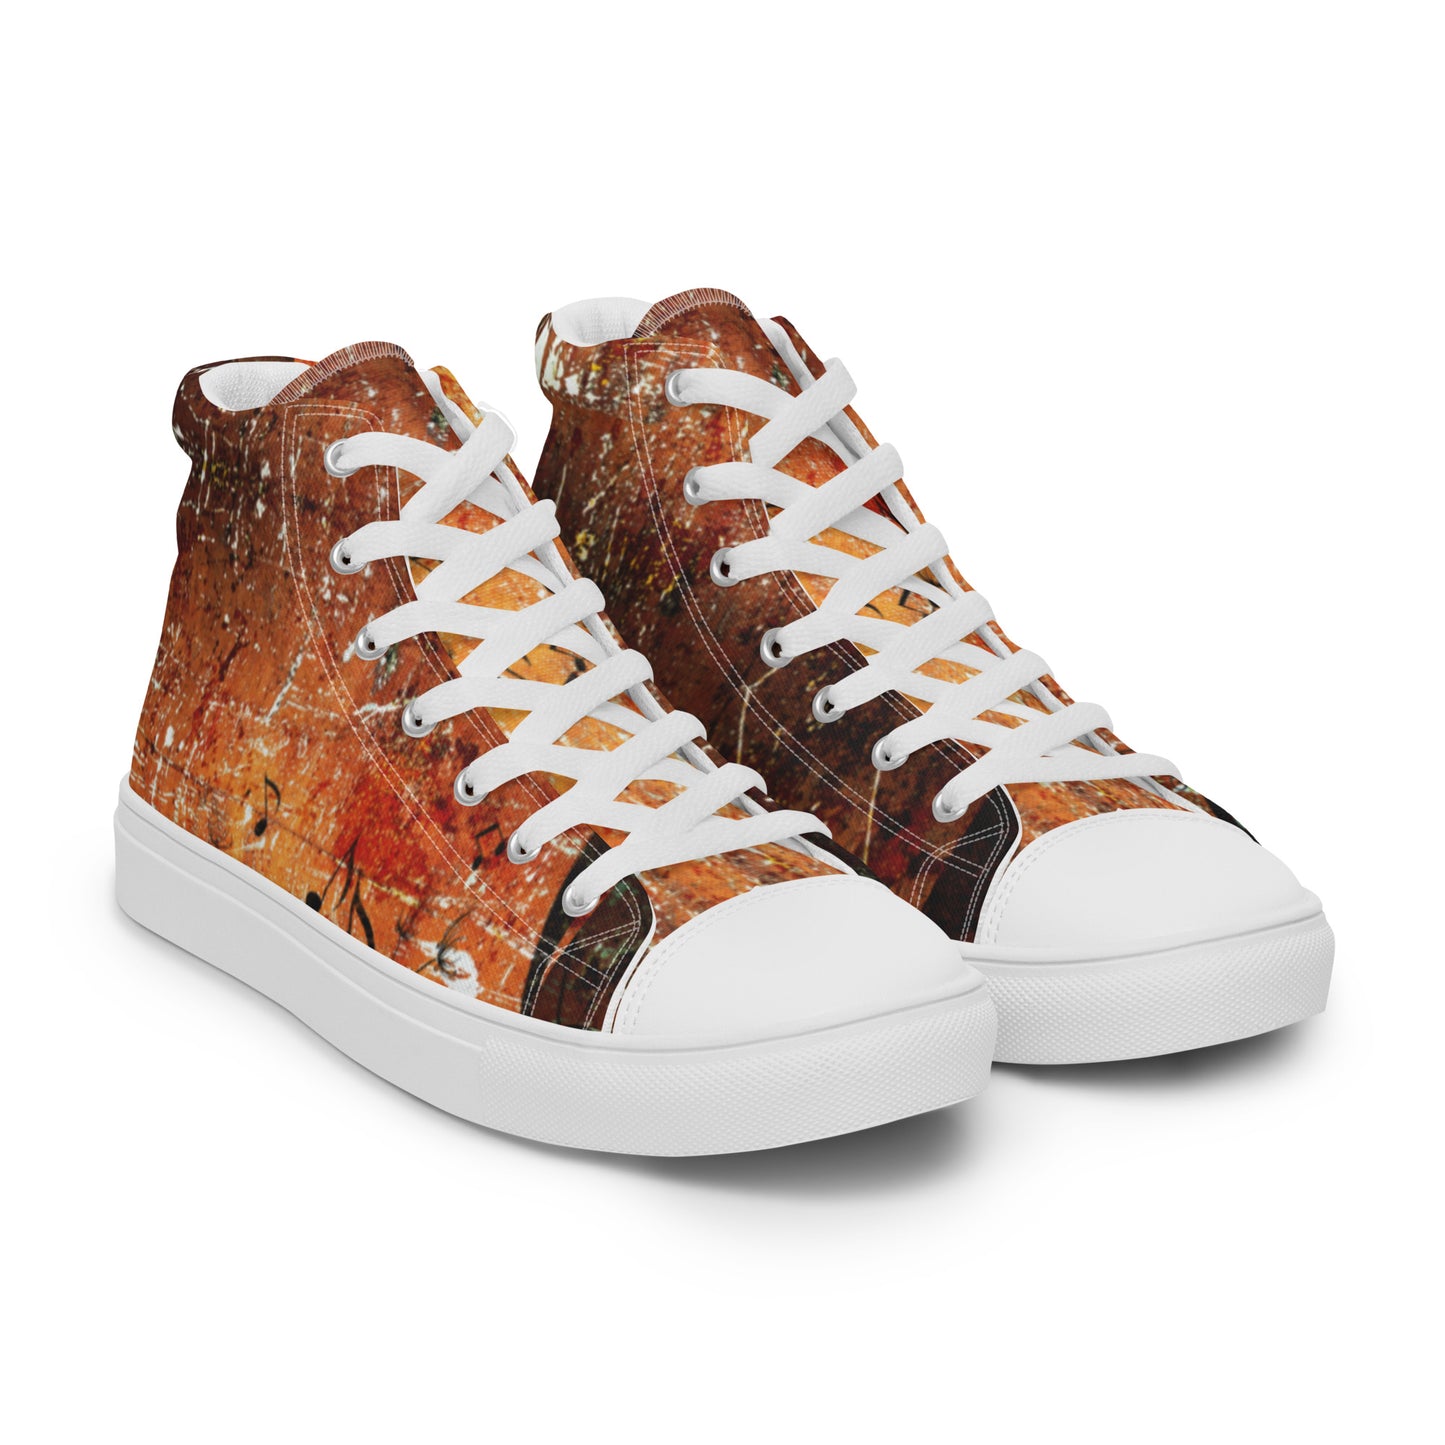 Rustic high top canvas shoes